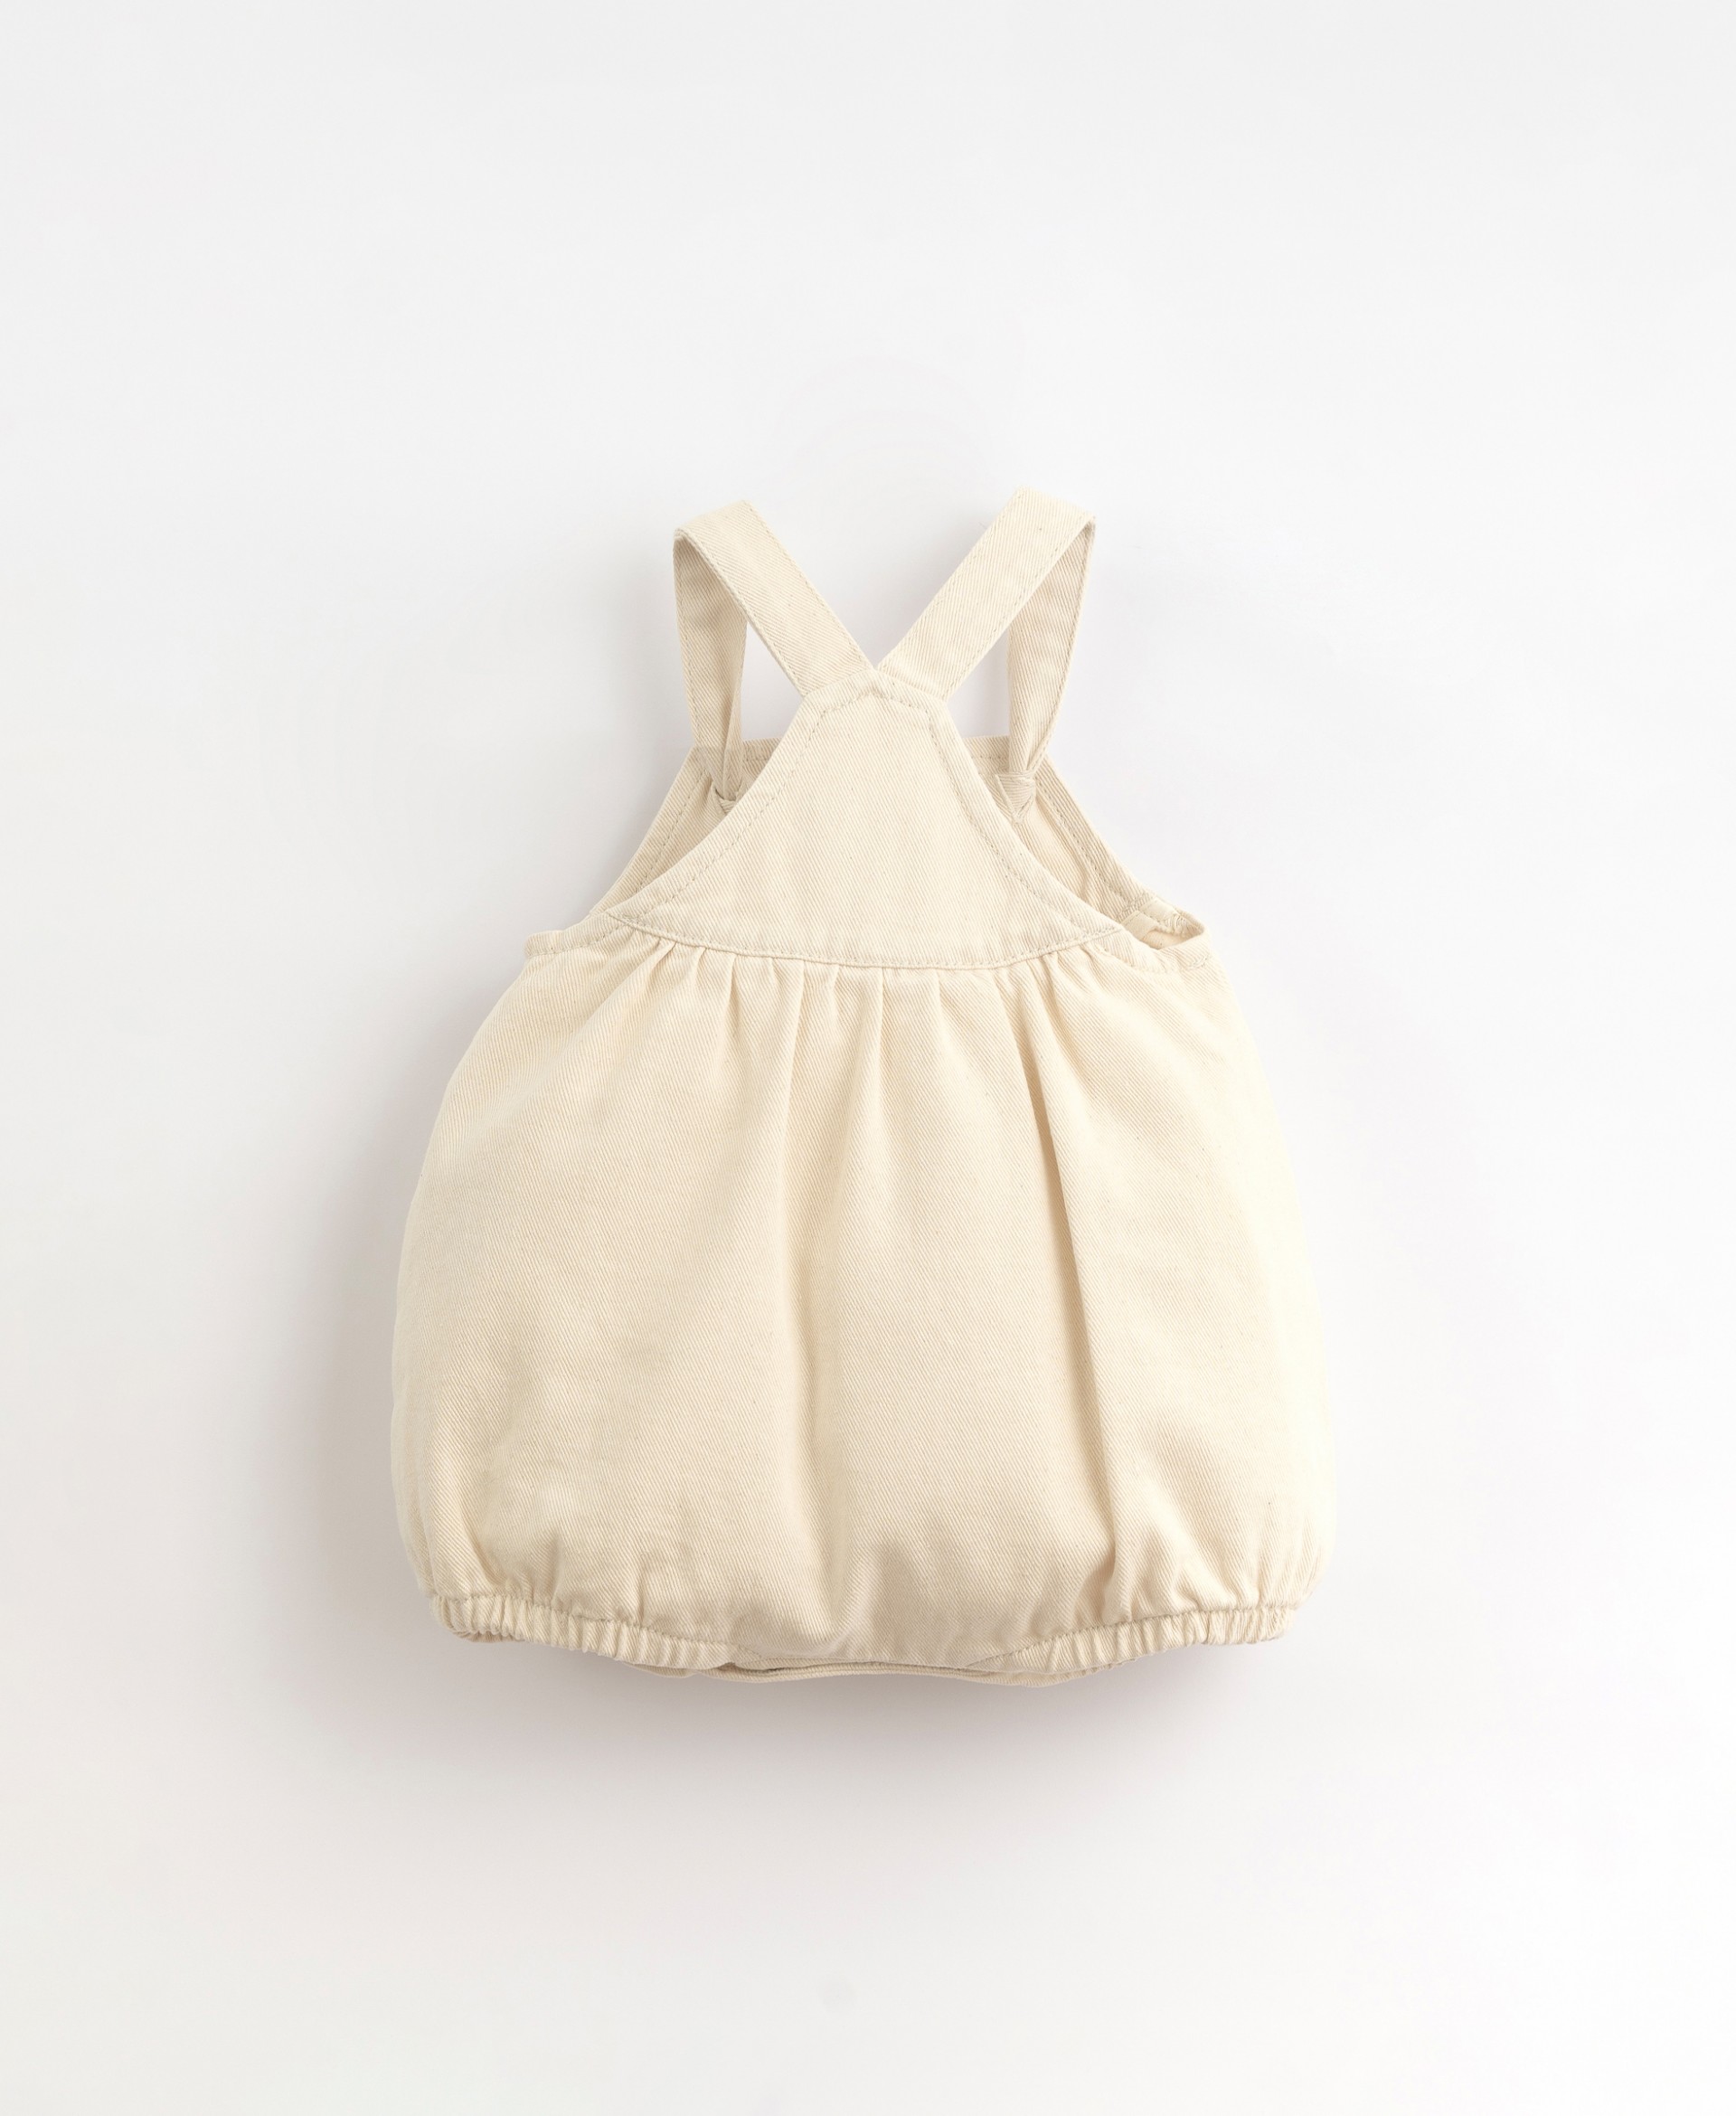 Serge jumpsuit with front pocket | Organic Care